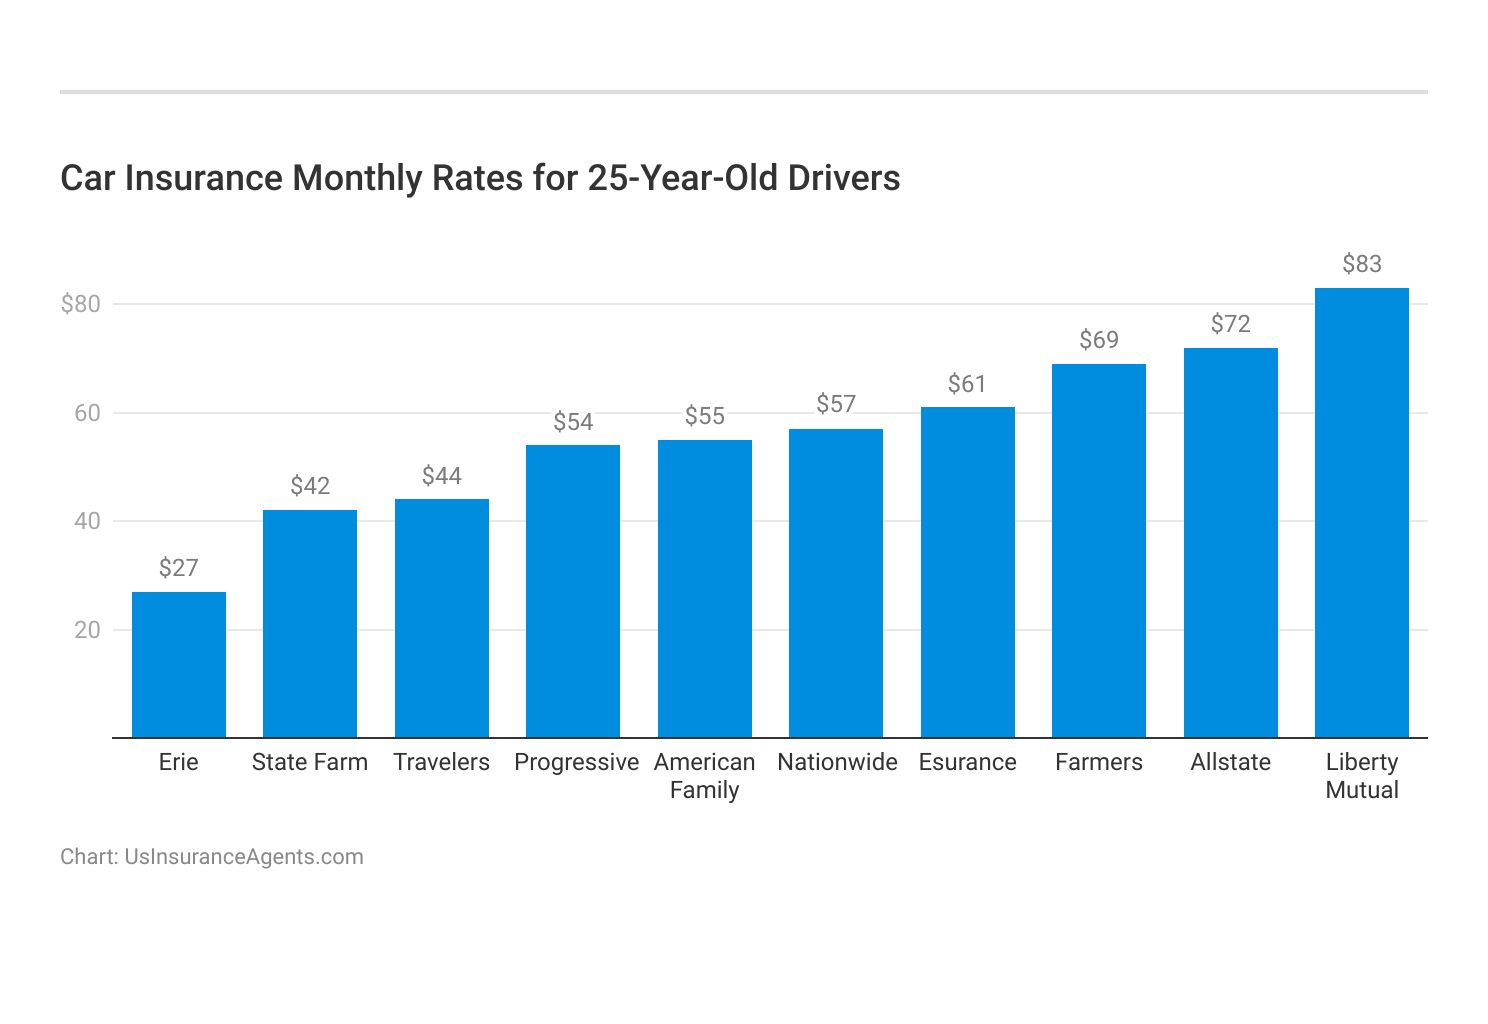 <h3>Car Insurance Monthly Rates for 25-Year-Old Drivers</h3>